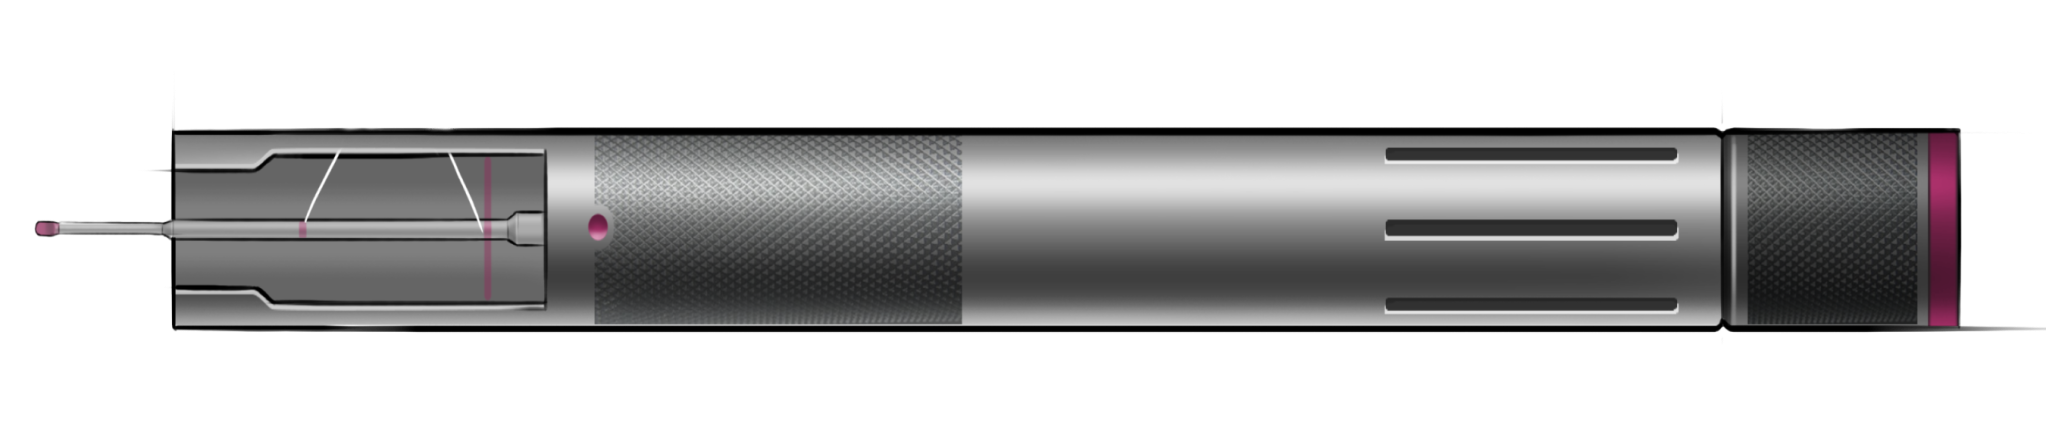 Drawing of the handle of the Monarch IV device with part of the inside exposed.